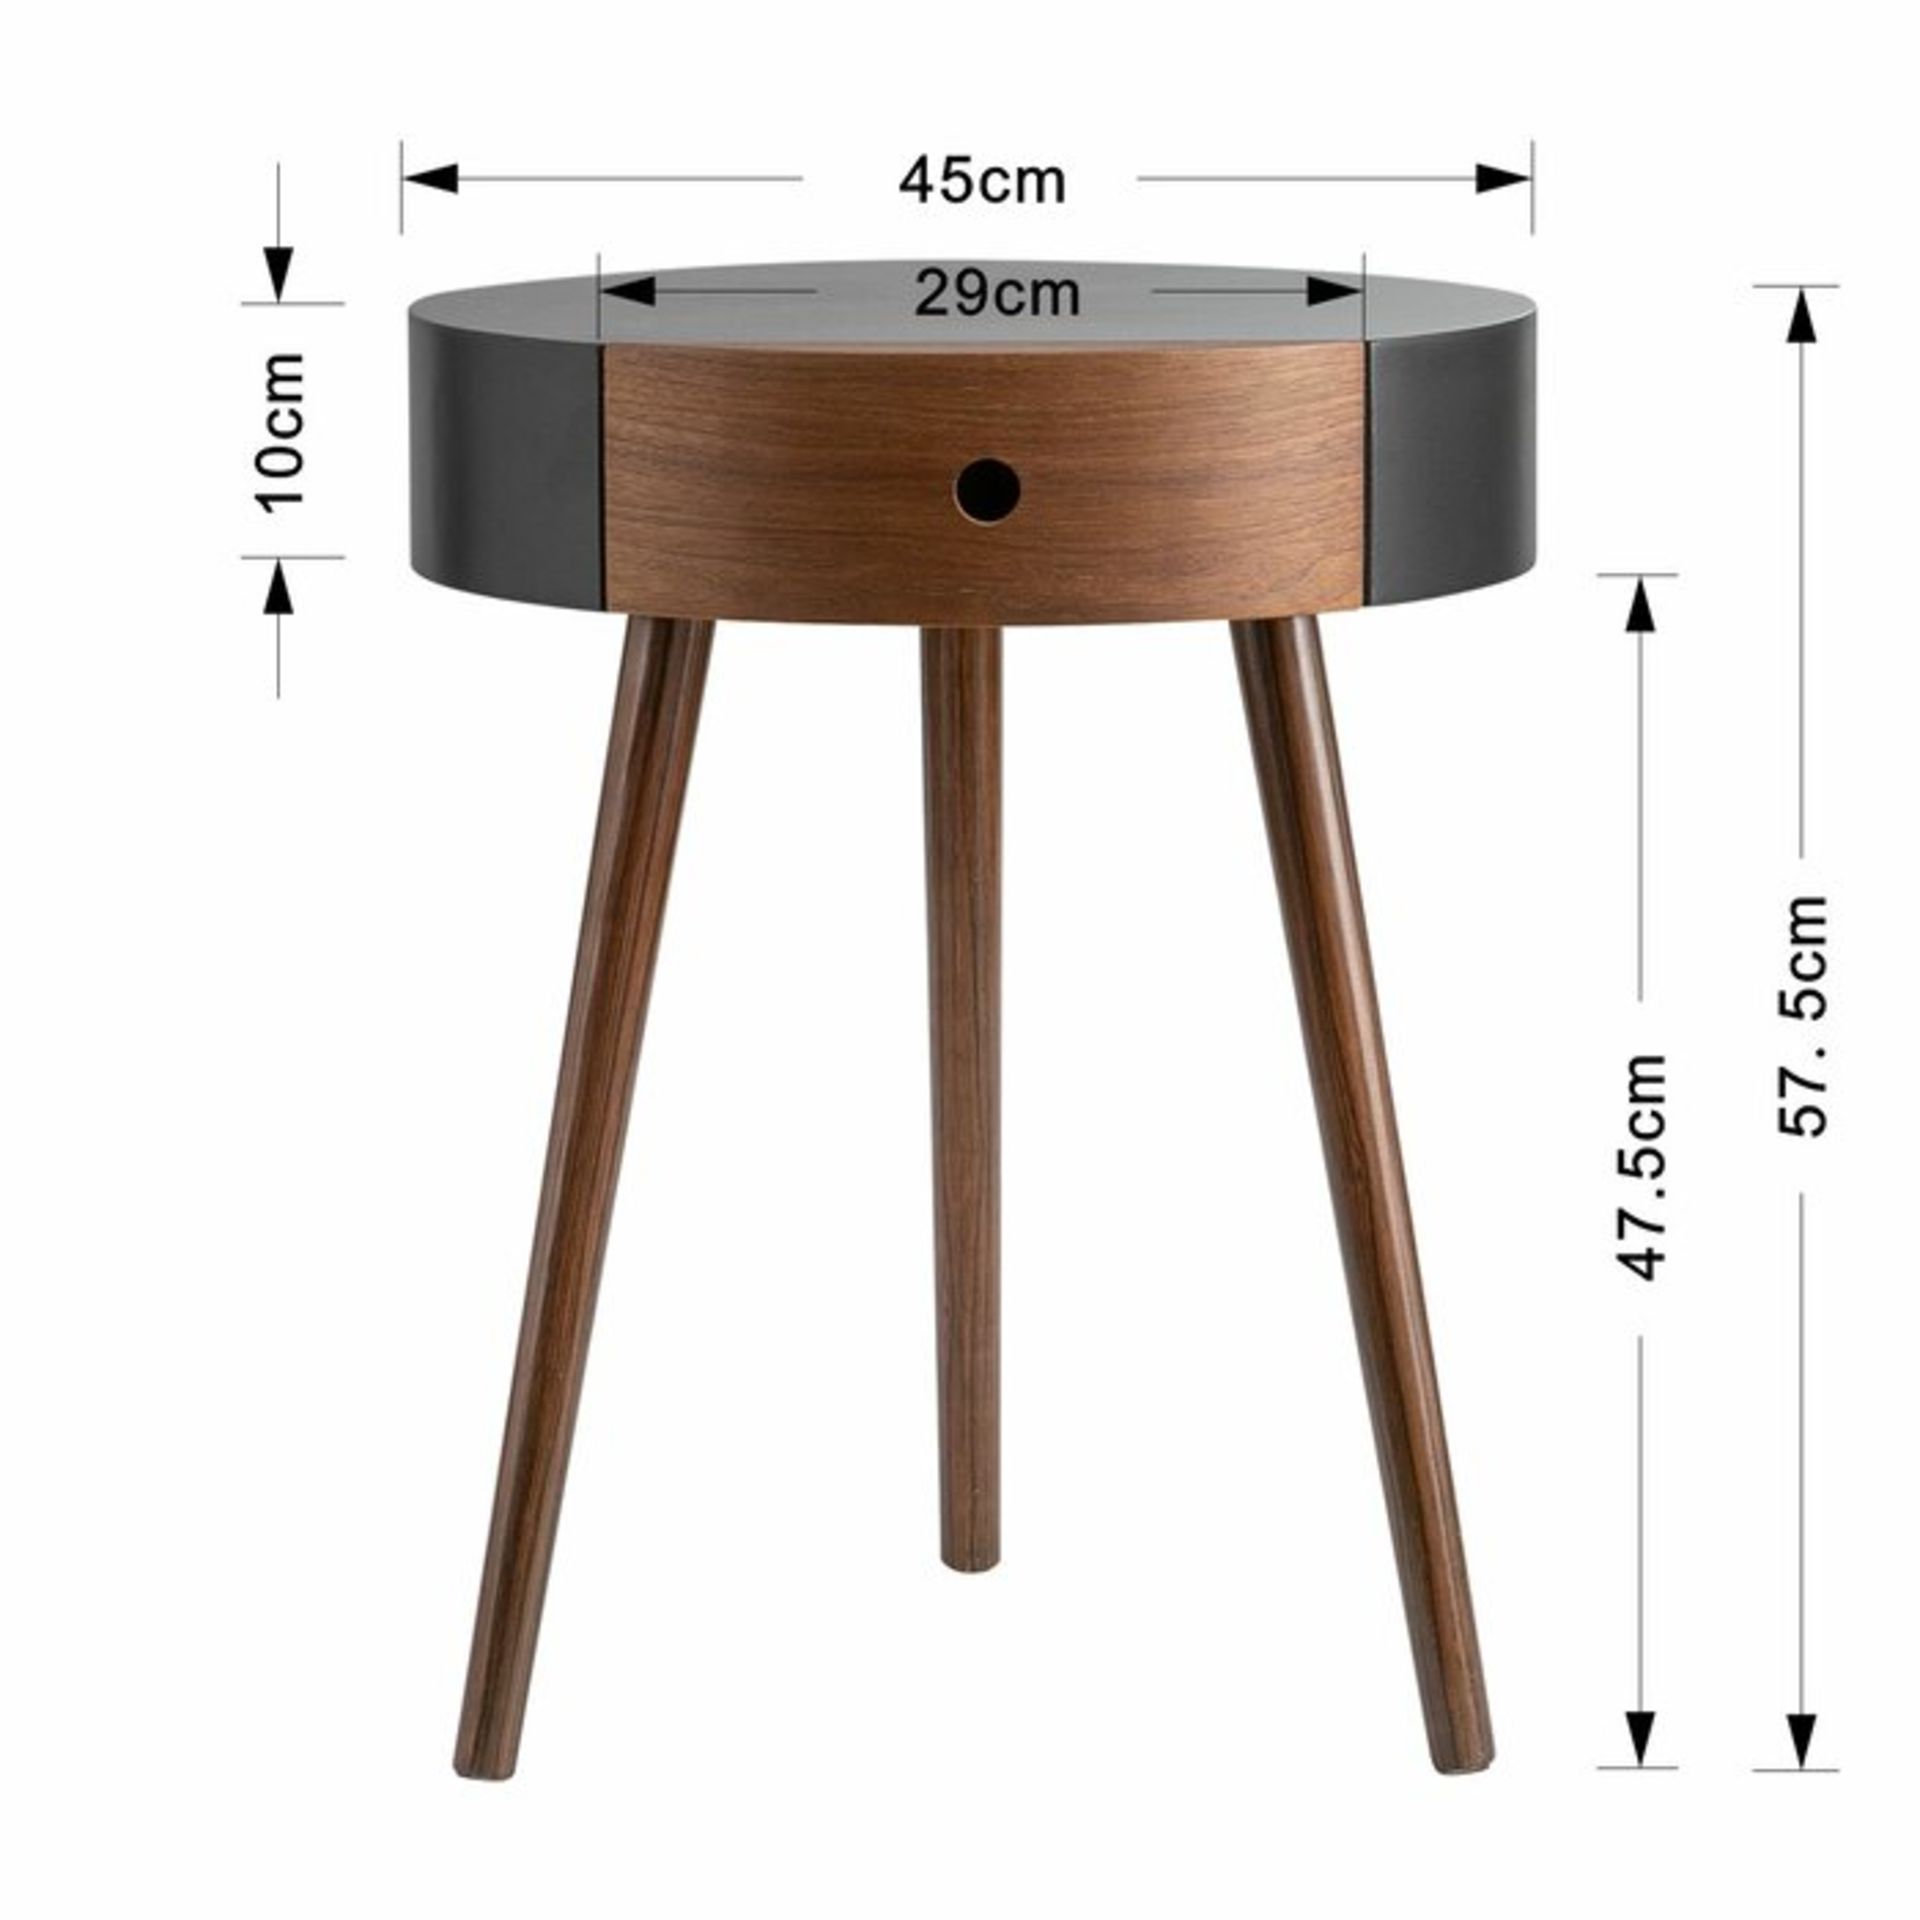 Whiteley Side Table - RRP £78.99 - Image 2 of 2